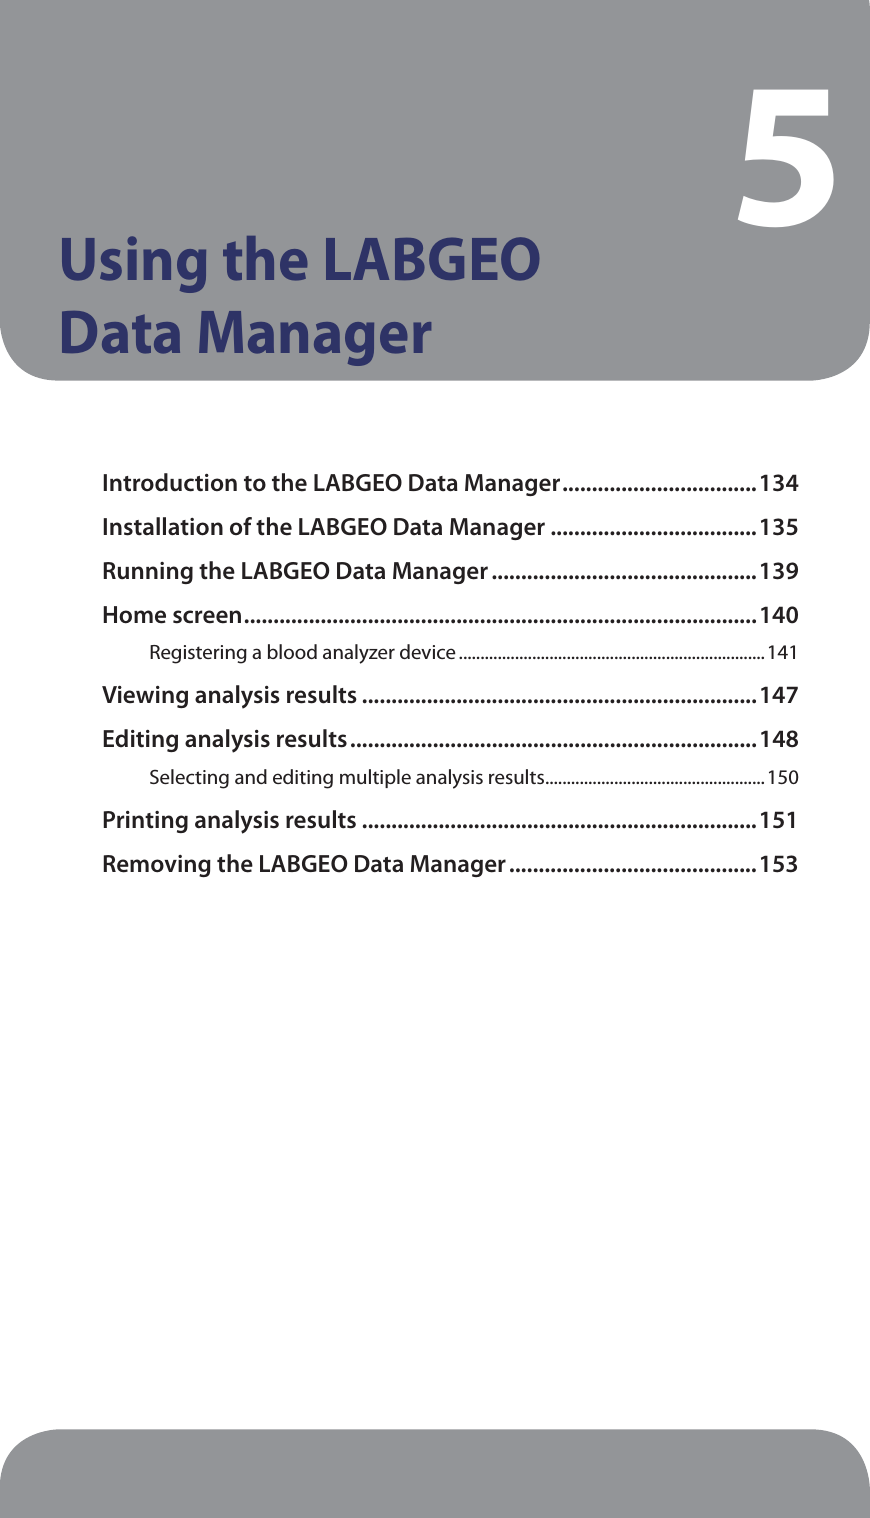 Using the LABGEO  Data Manager5Introduction to the LABGEO Data Manager .................................134Installation of the LABGEO Data Manager ...................................135Running the LABGEO Data Manager .............................................139Home screen .......................................................................................140Registering a blood analyzer device .......................................................................141Viewing analysis results ...................................................................147Editing analysis results .....................................................................148Selecting and editing multiple analysis results ...................................................150Printing analysis results ...................................................................151Removing the LABGEO Data Manager ..........................................153